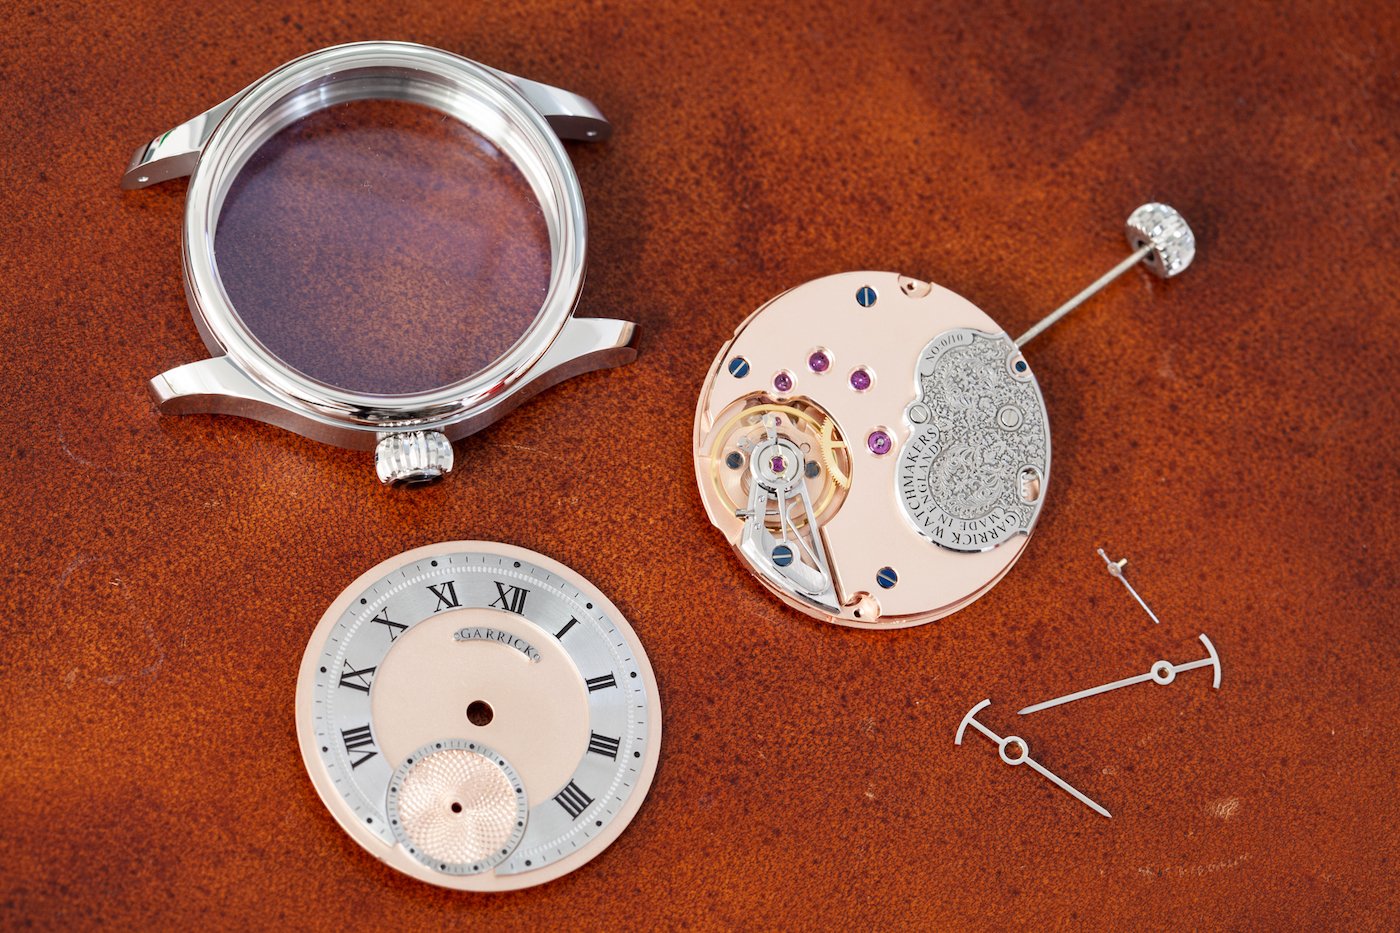 Garrick Watchmakers: the curious case of British High Horology